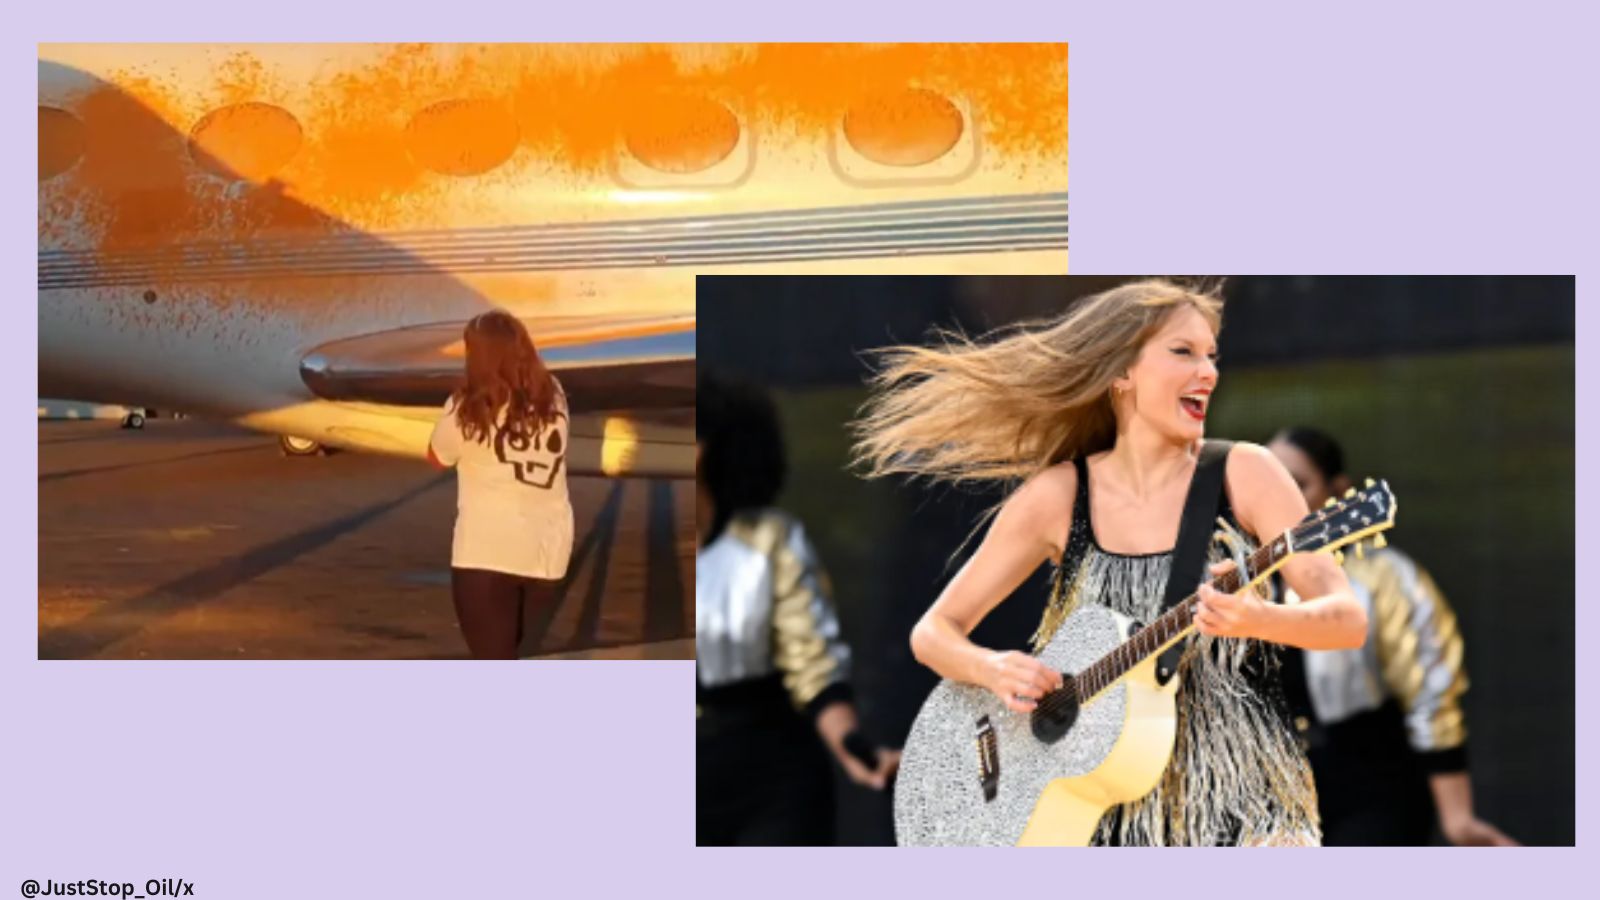 ‘Just Stop Oil’ protesters mistake private jets for Taylor Swift’s property and spray paint artwork at London Stansted Airport | Trending News